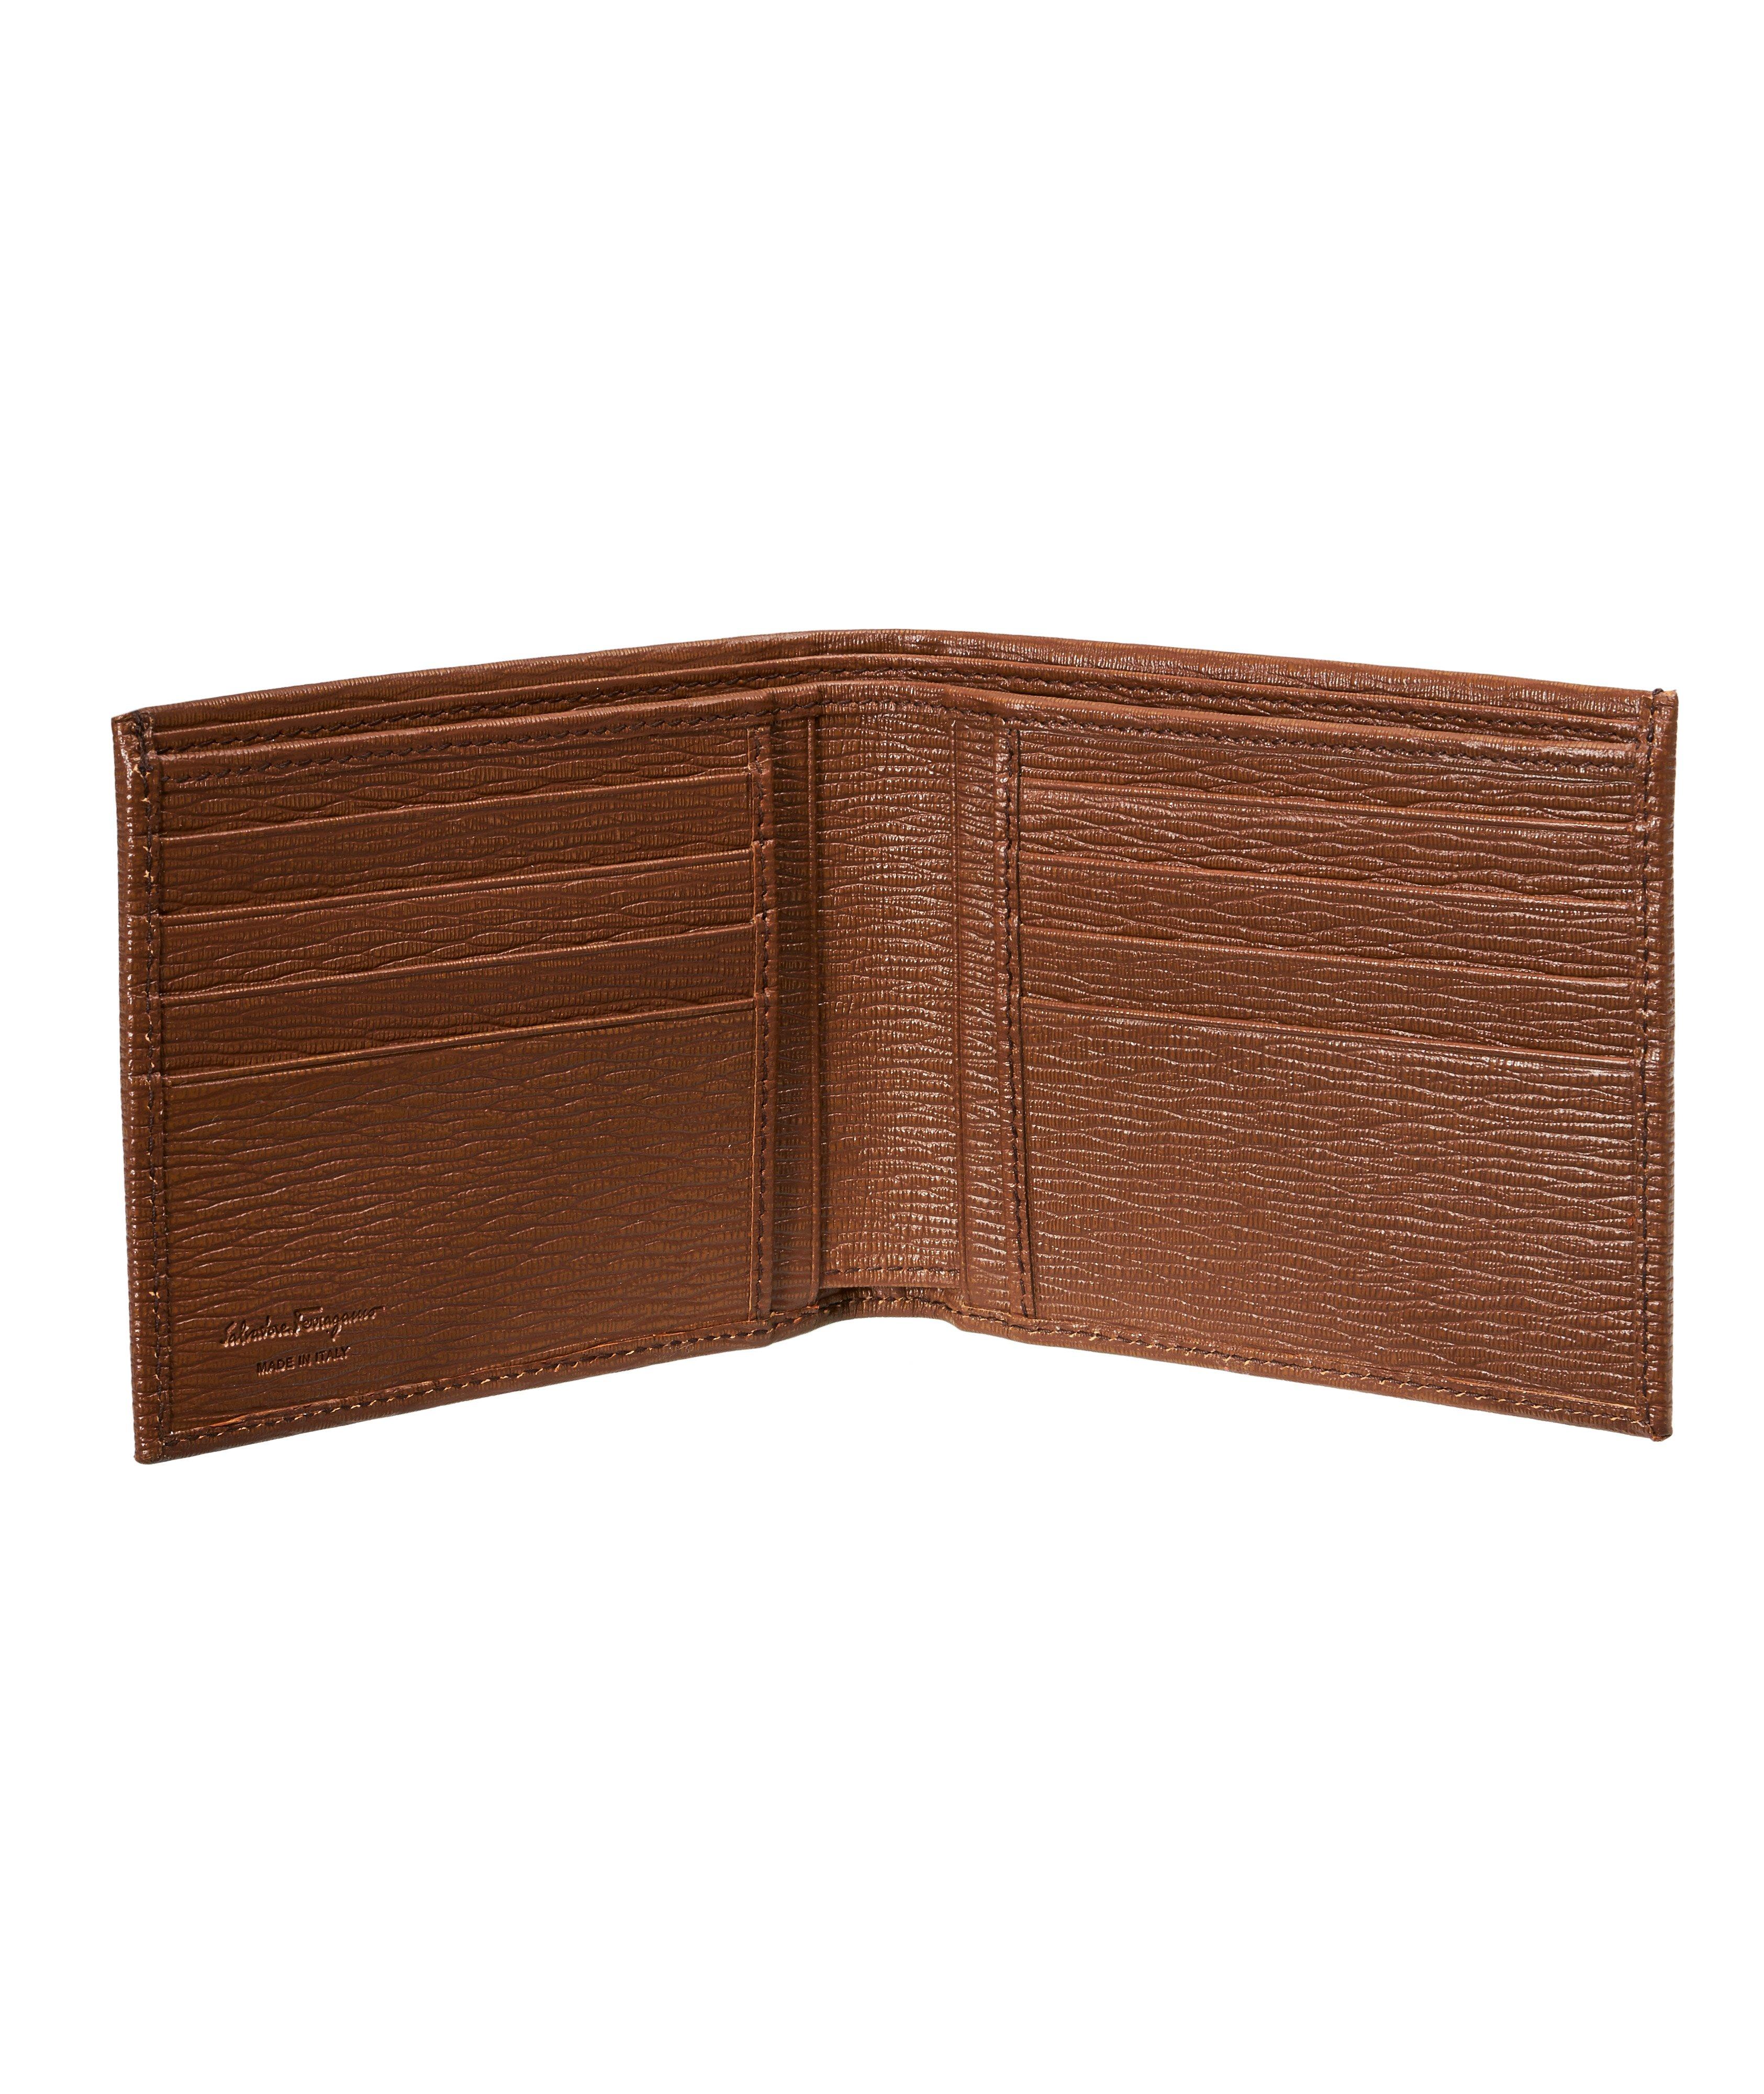 Leather Bifold Wallet image 1